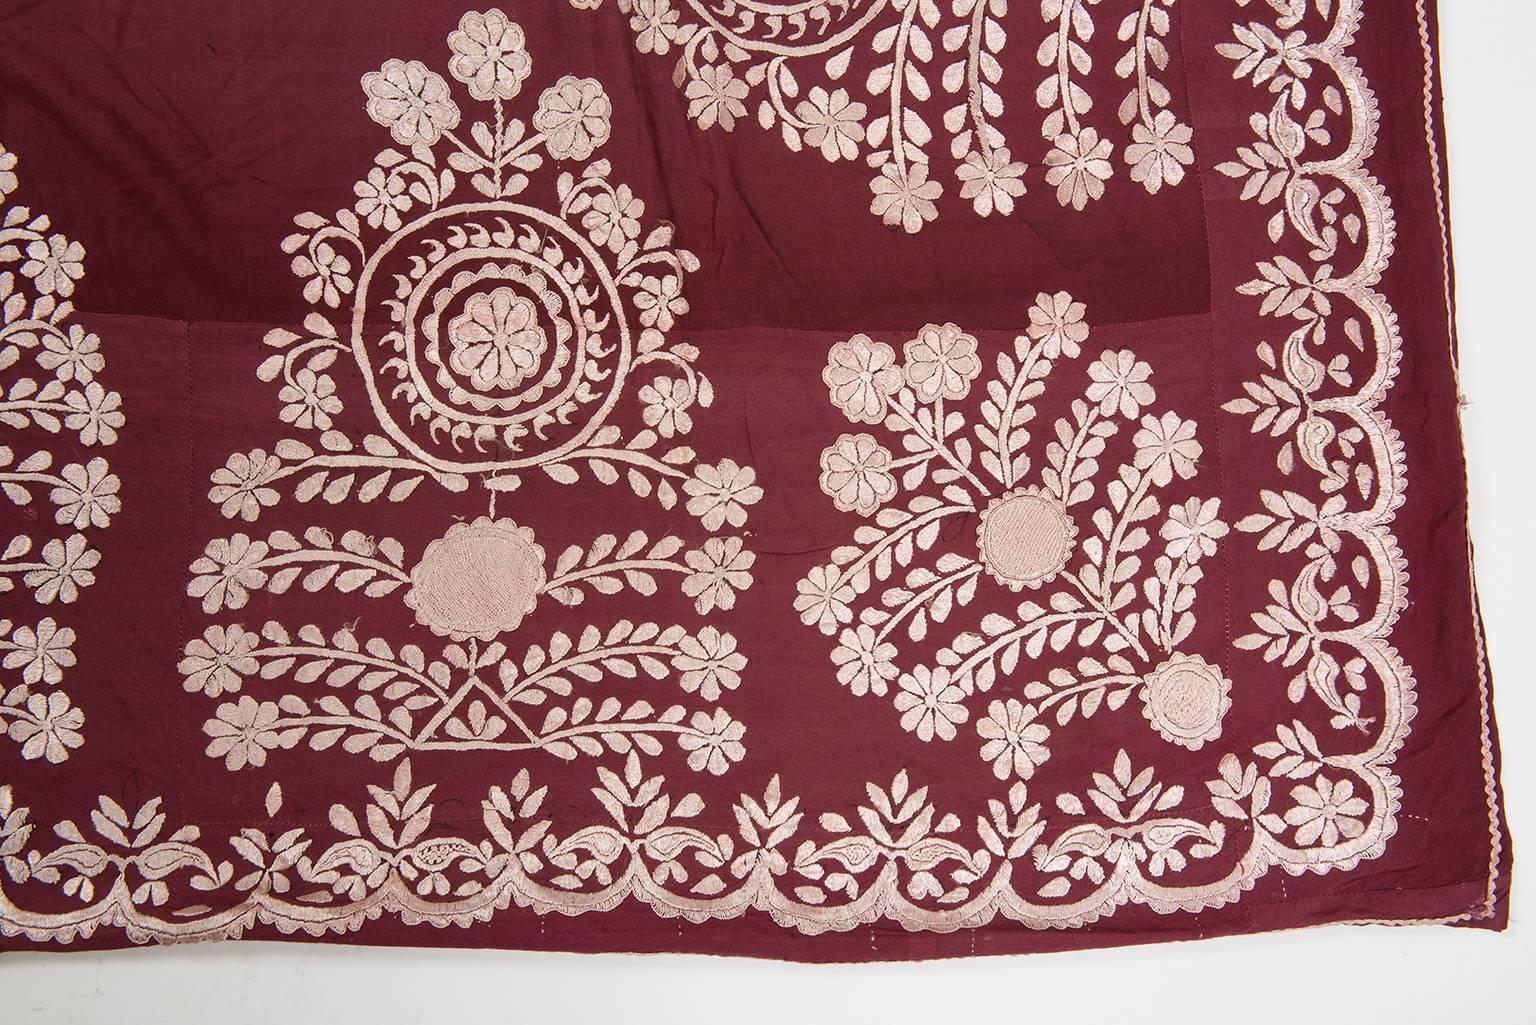 N. 861. Unusual vintage Uzbekistan Suzani with rare "mauve" color.
Silk embroidery on cotton.
Suitable as wall hanging, table cover, on the couch.